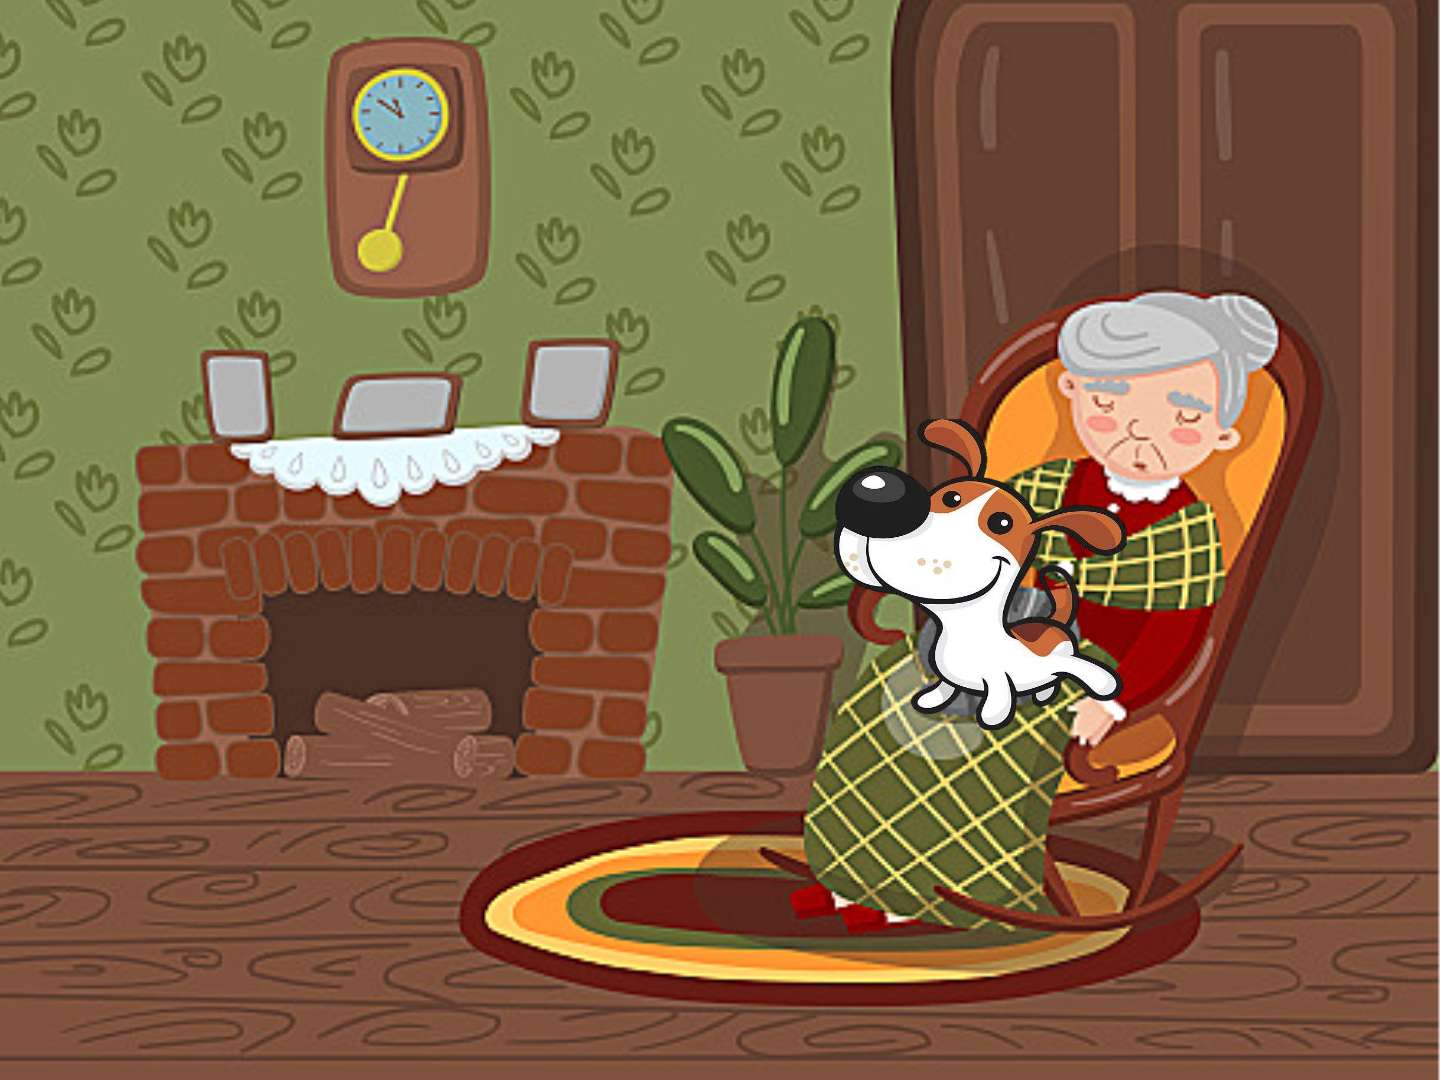 Grandma and the dog jigsaw puzzle online